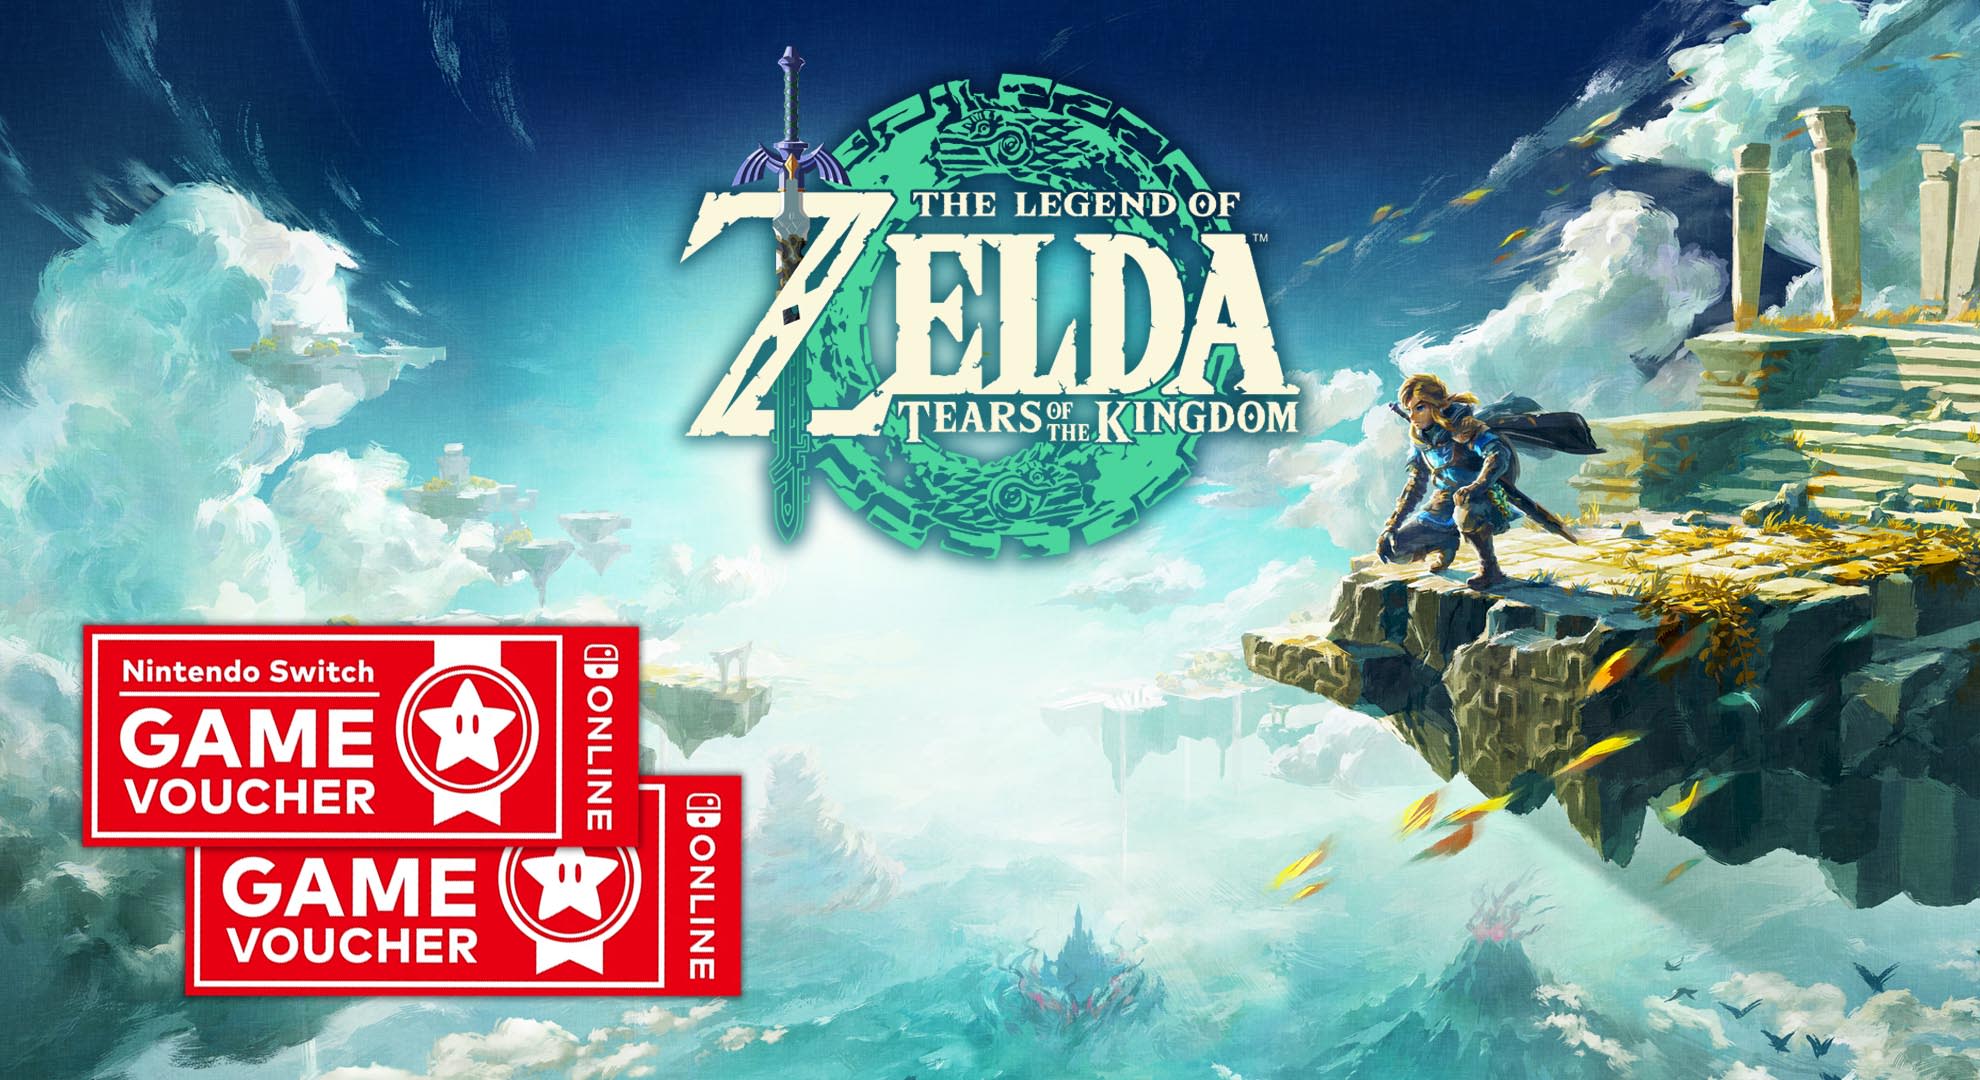 An epic adventure awaits in the Legend of Zelda: Tears of the Kingdom Hero